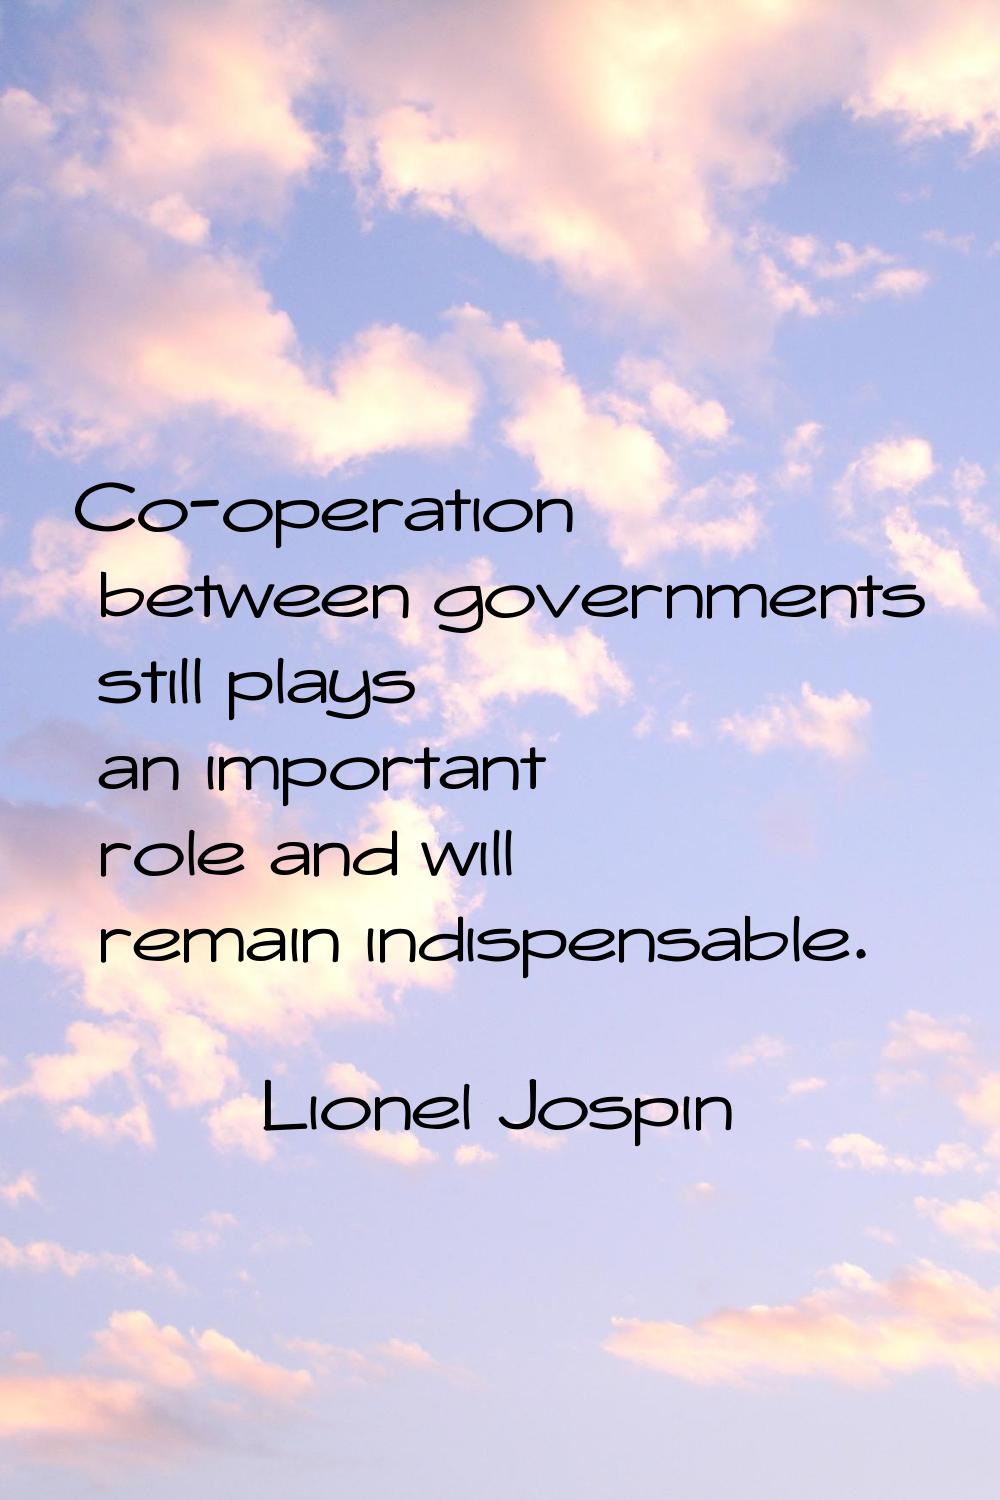 Co-operation between governments still plays an important role and will remain indispensable.